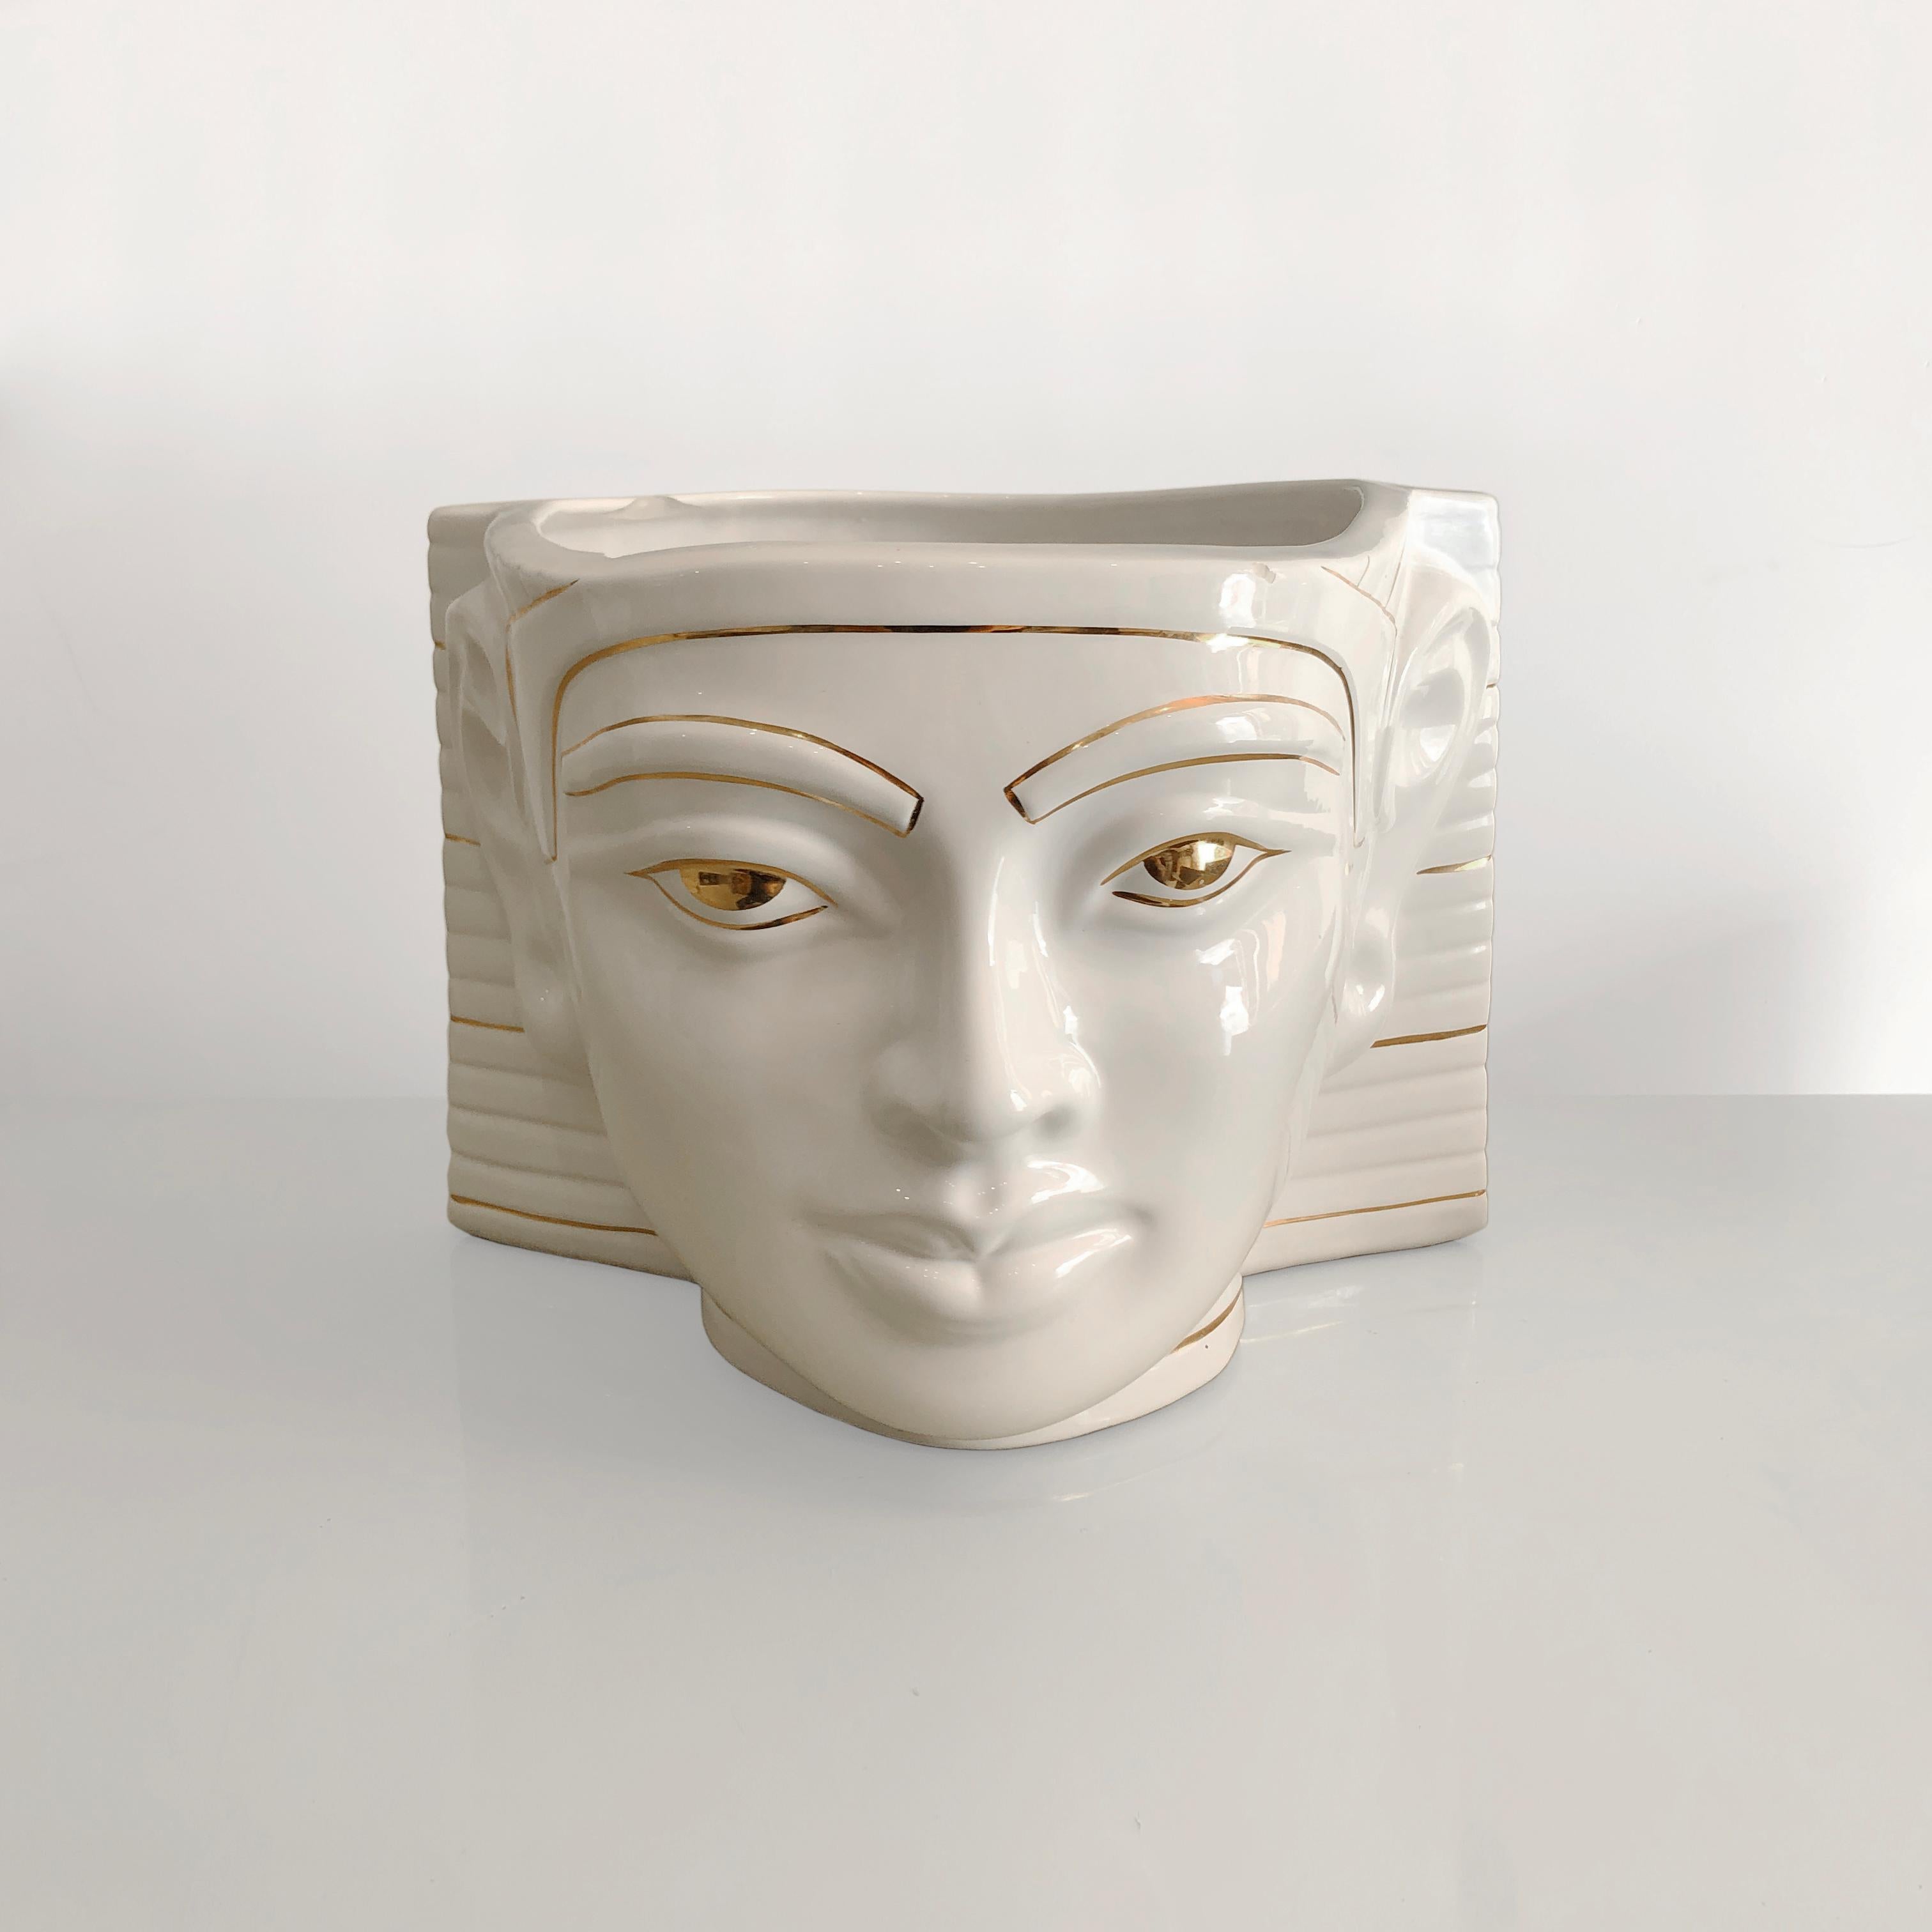 This Egyptian inspired ceramic glazed planter by Antica Athena consists of a white Pharaoh’s face with gold plated detailing. The Pharaoh's face brings to mind the Egyptian revival of the Art Deco period; an era which came about due to the sheer